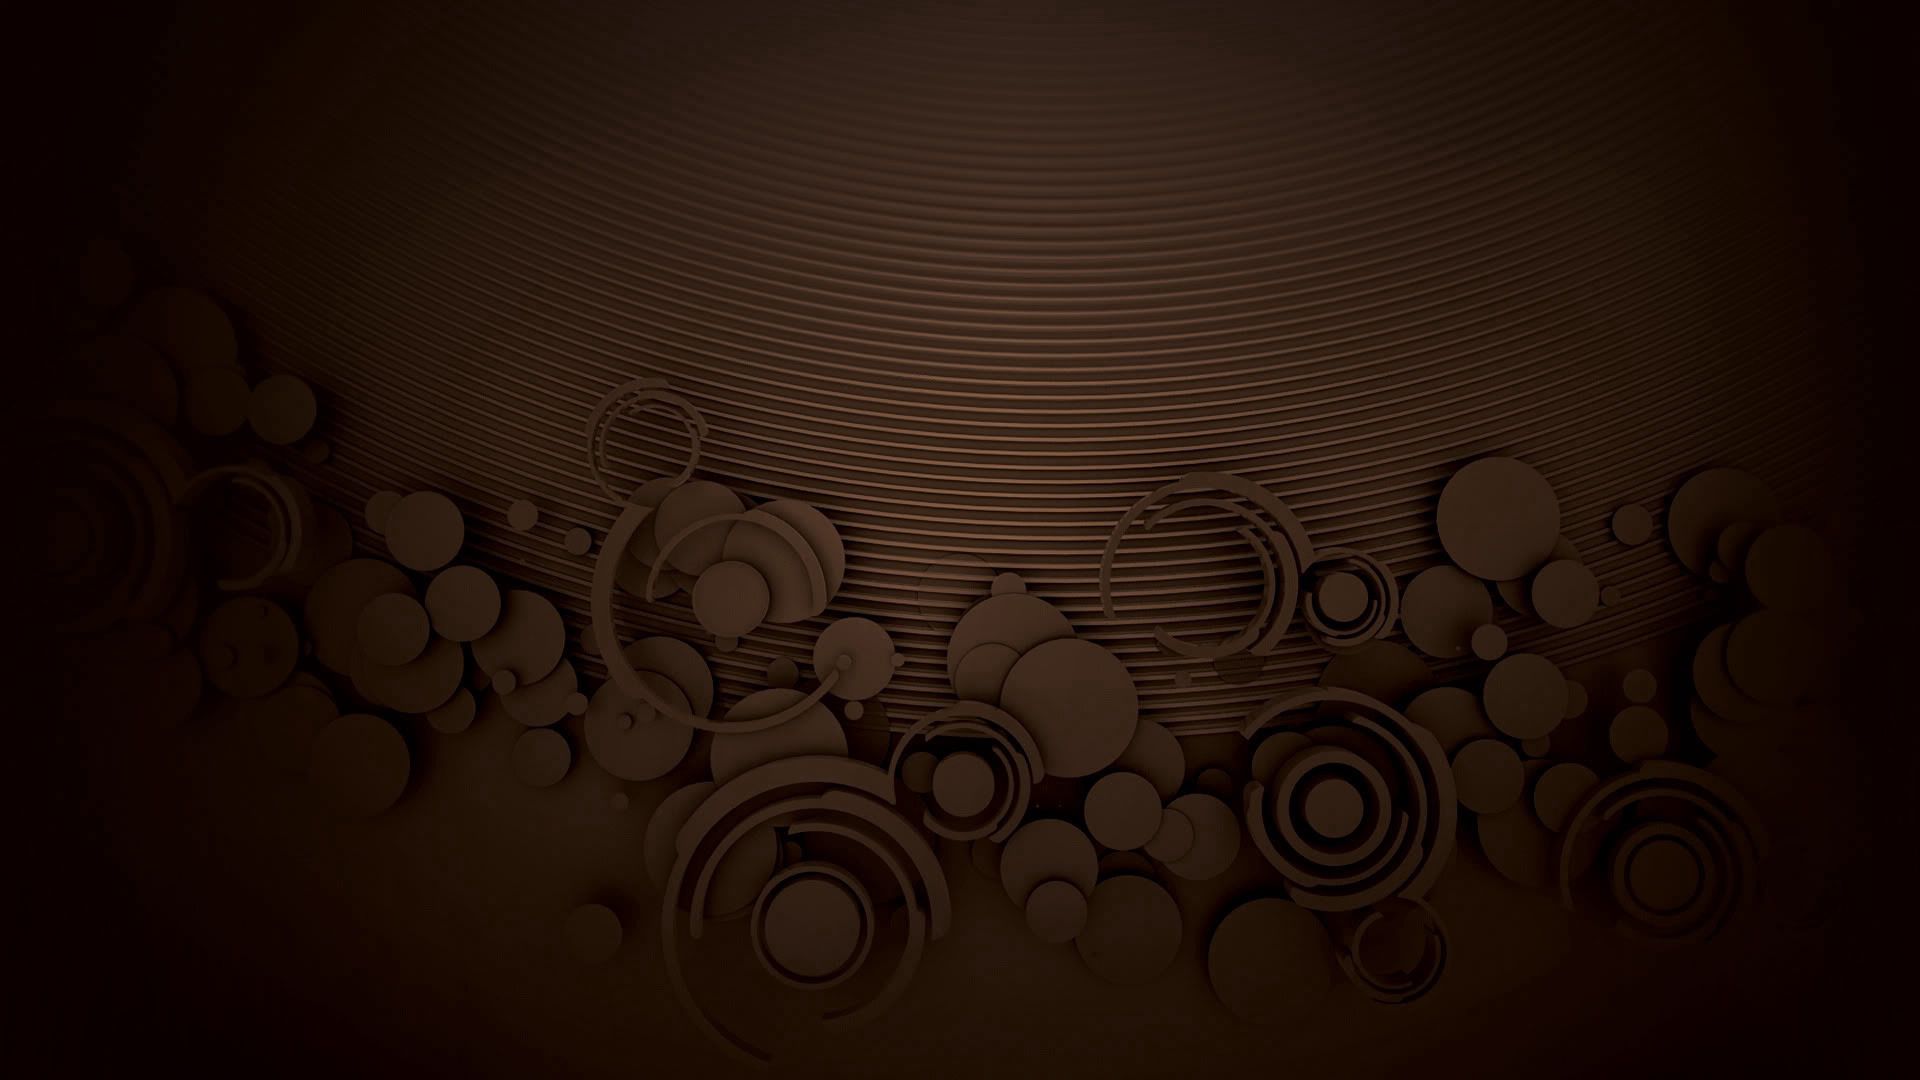 chocolate, abstract, background, circles, pattern Image for desktop